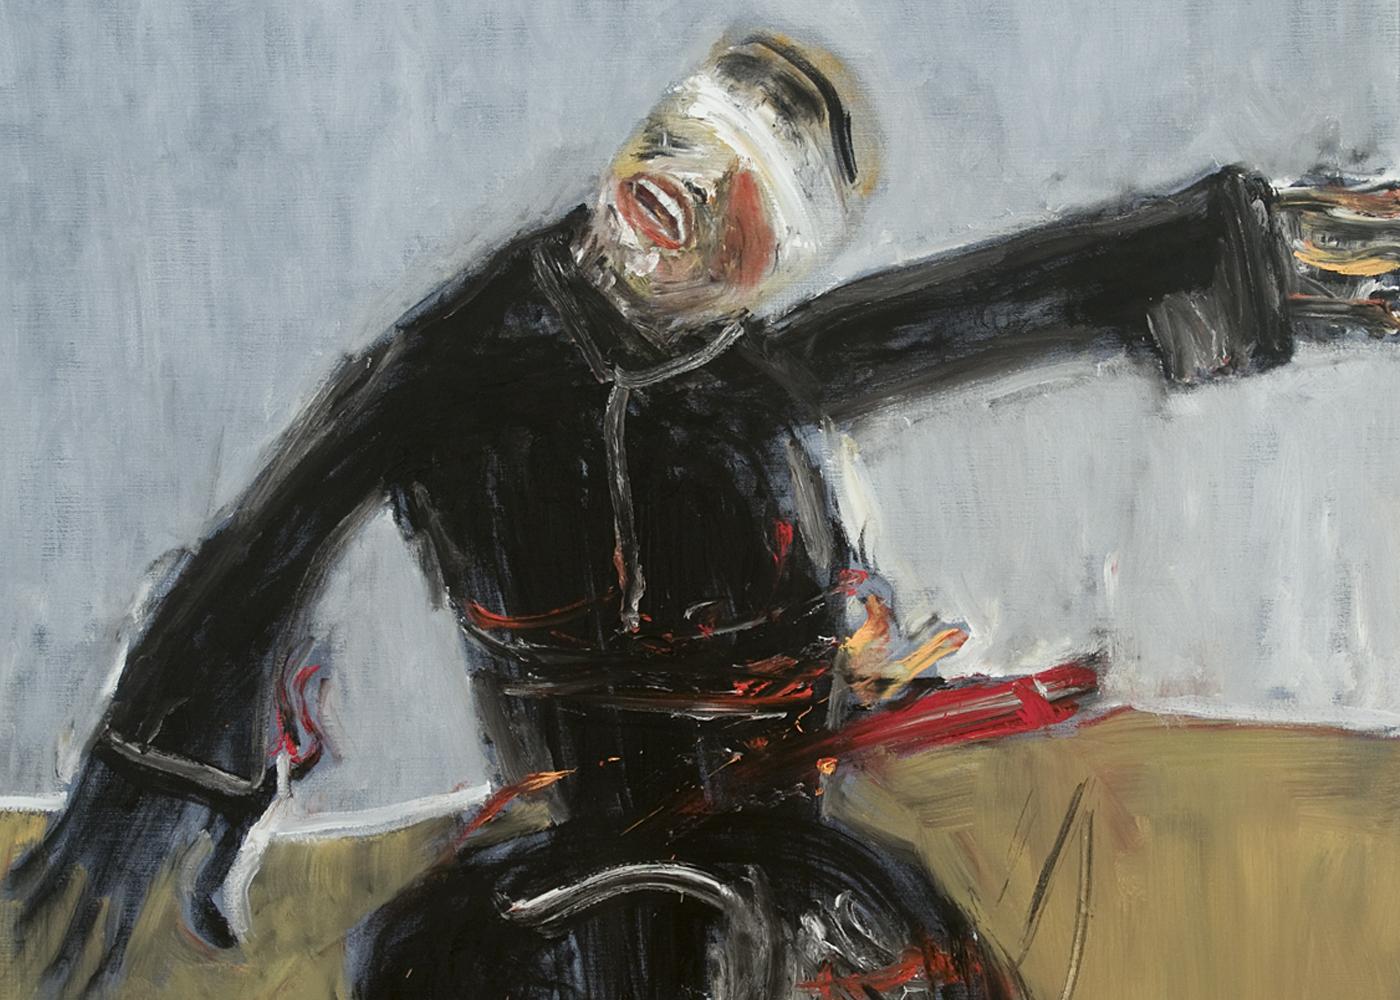 Blindfolded Hasid, expressionistic figurative painting set in war landscape - Gray Figurative Painting by Michael Hafftka